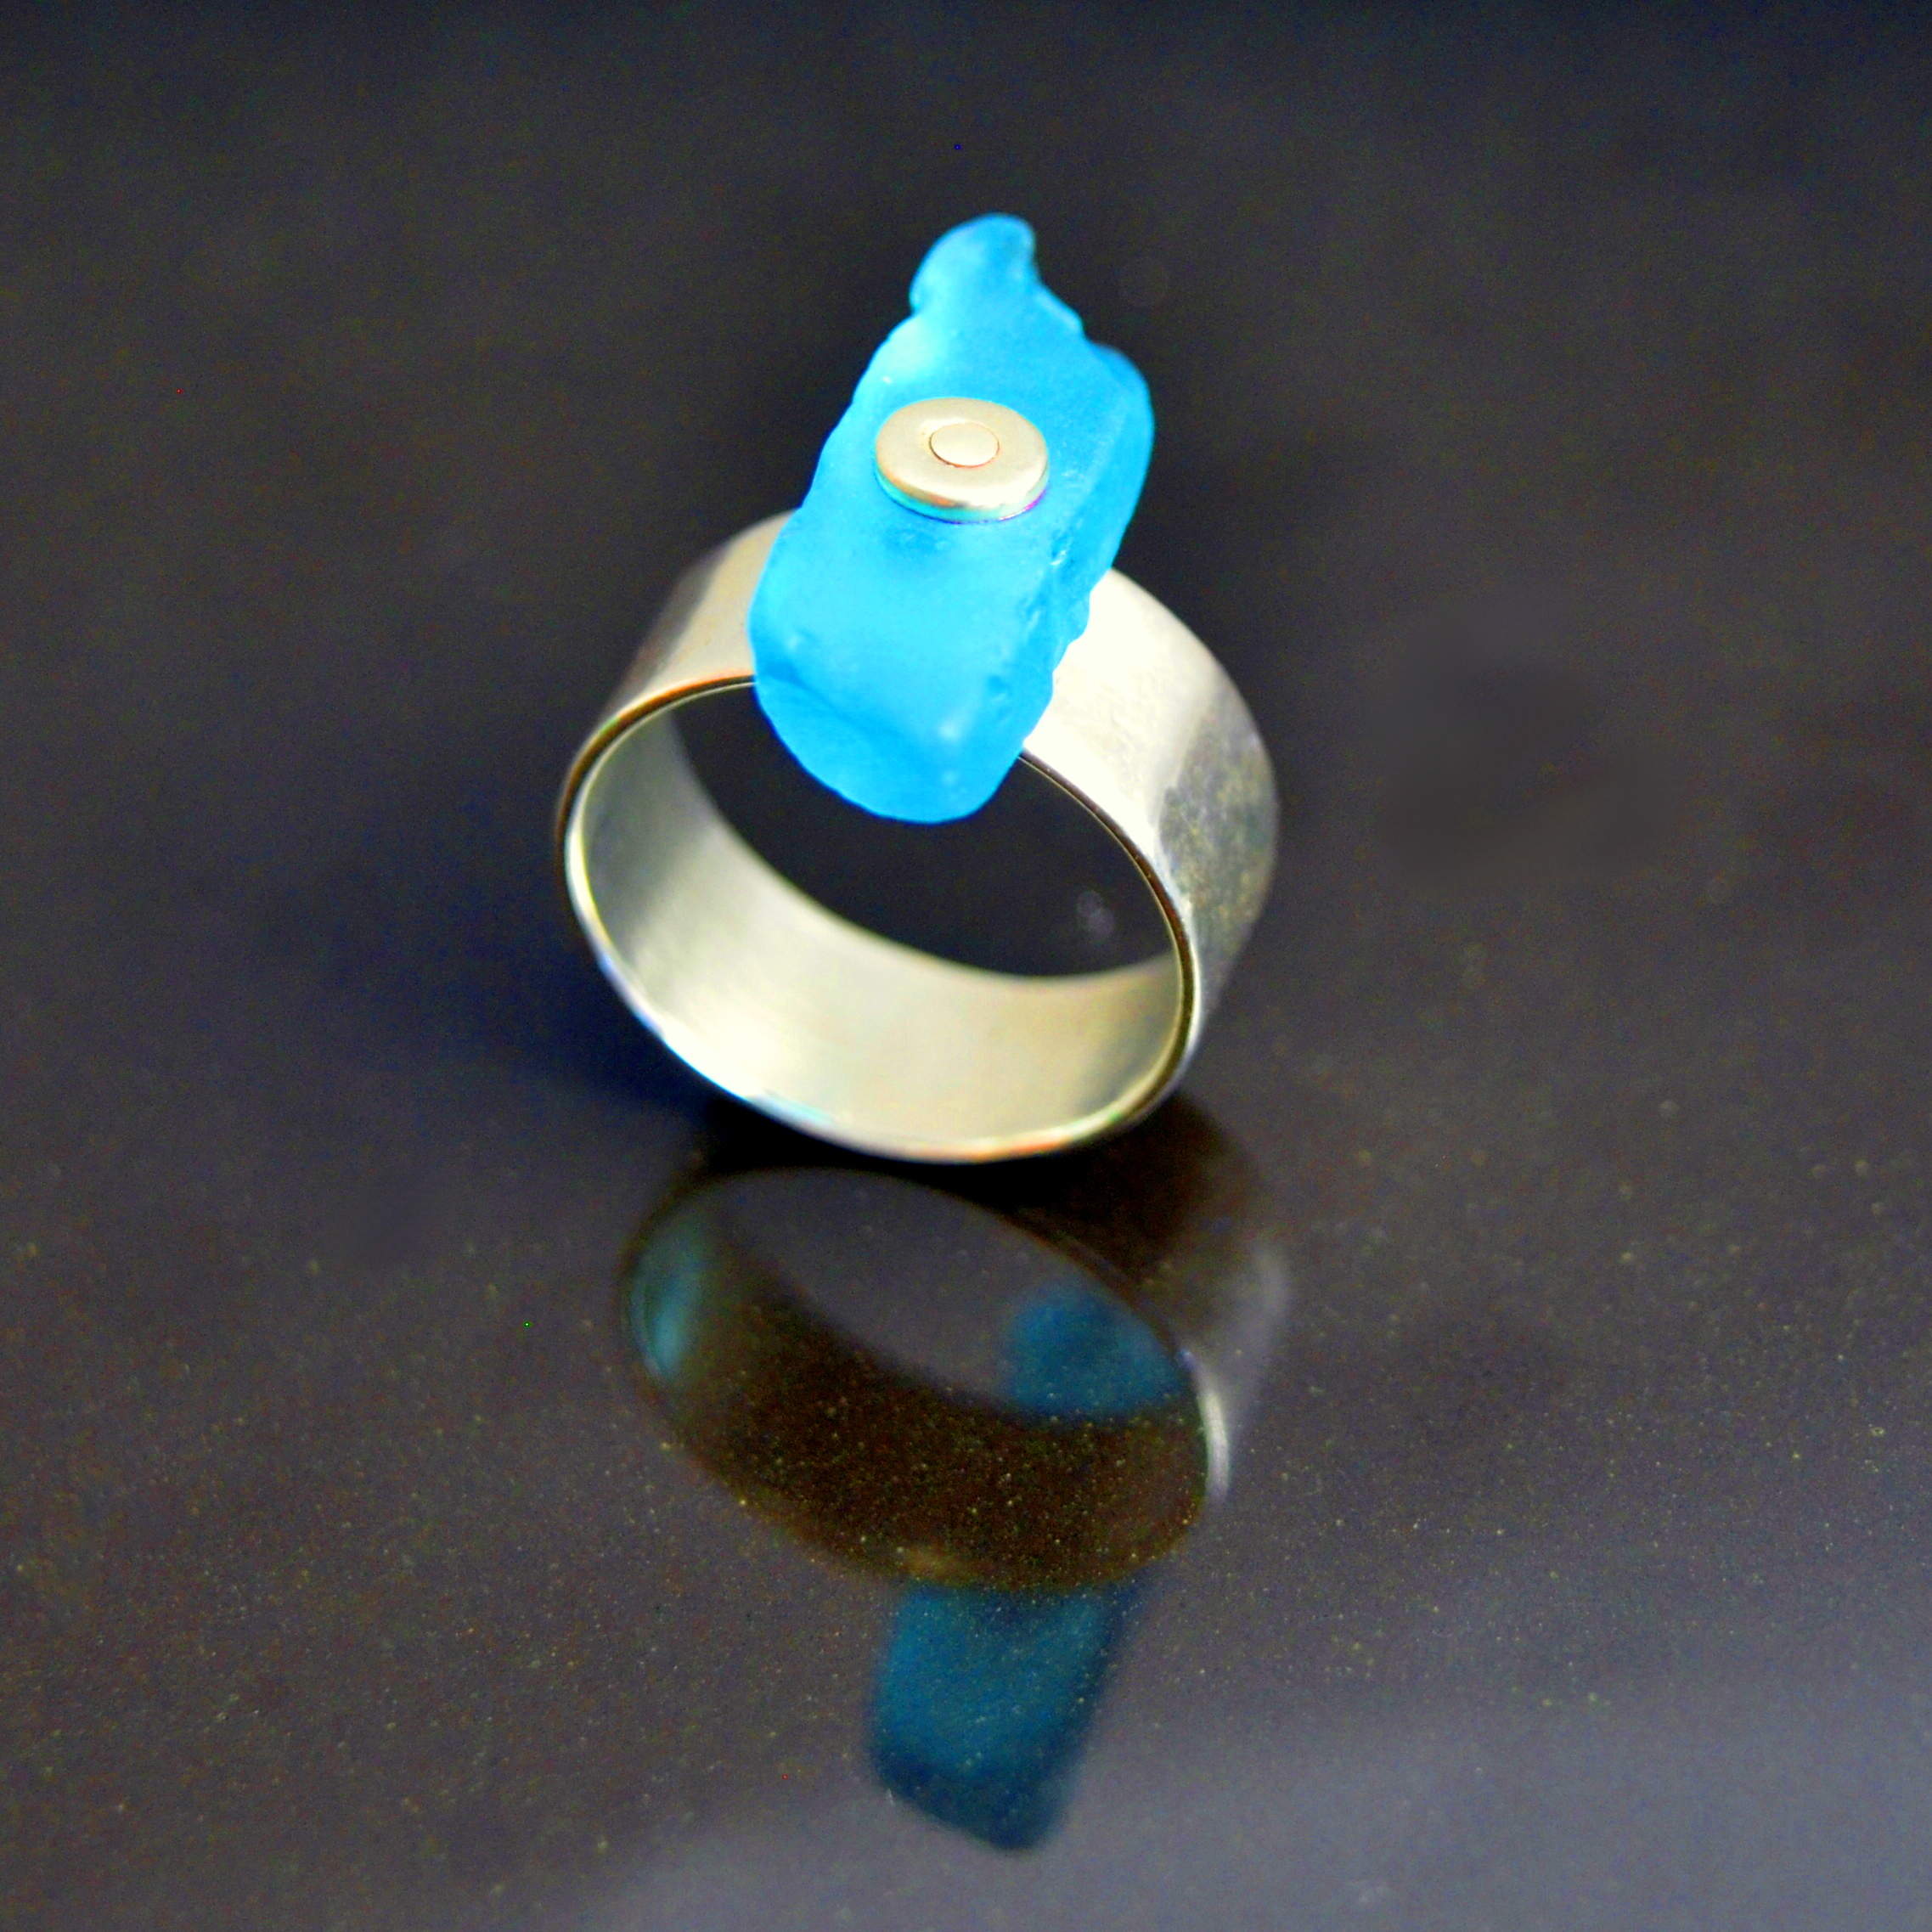 Sea Glass and Silver Clay Ring by Tracey Spurgin of Craftworx Jewellery Workshops